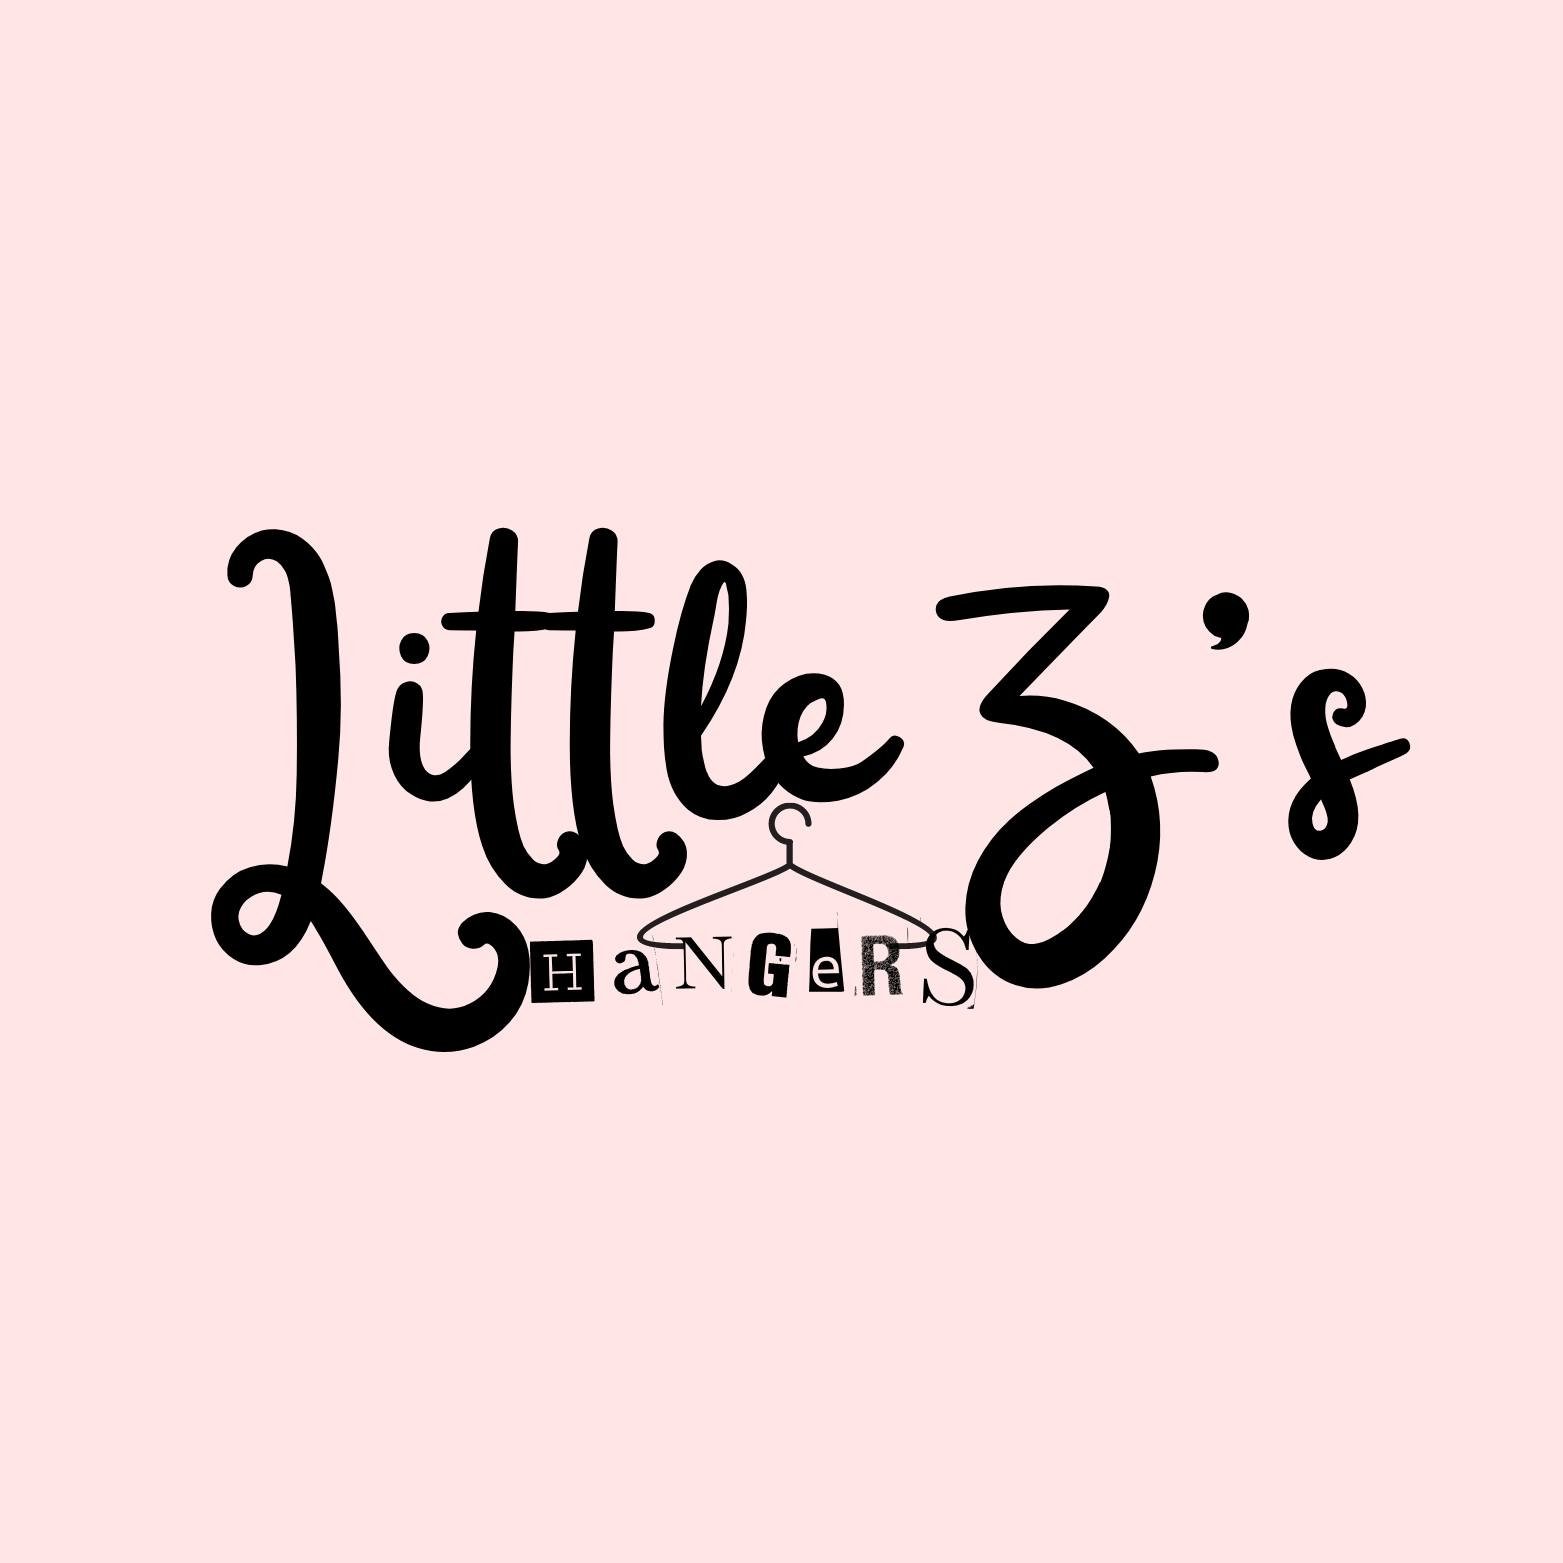 Little Z’s Hangers – Your One-Stop Shop for Quality Baby and Kid’s Clothing